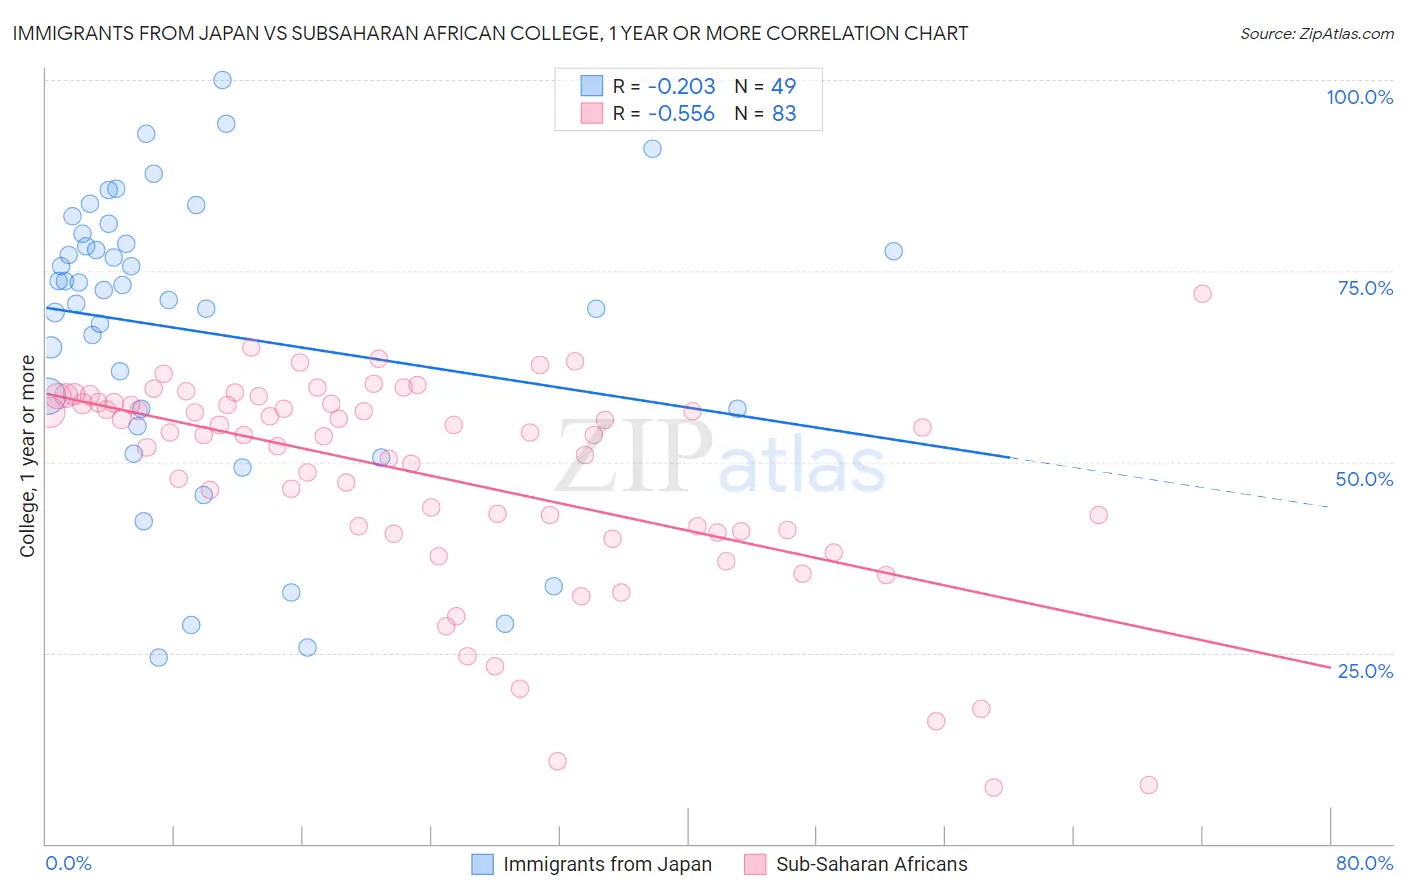 Immigrants from Japan vs Subsaharan African College, 1 year or more